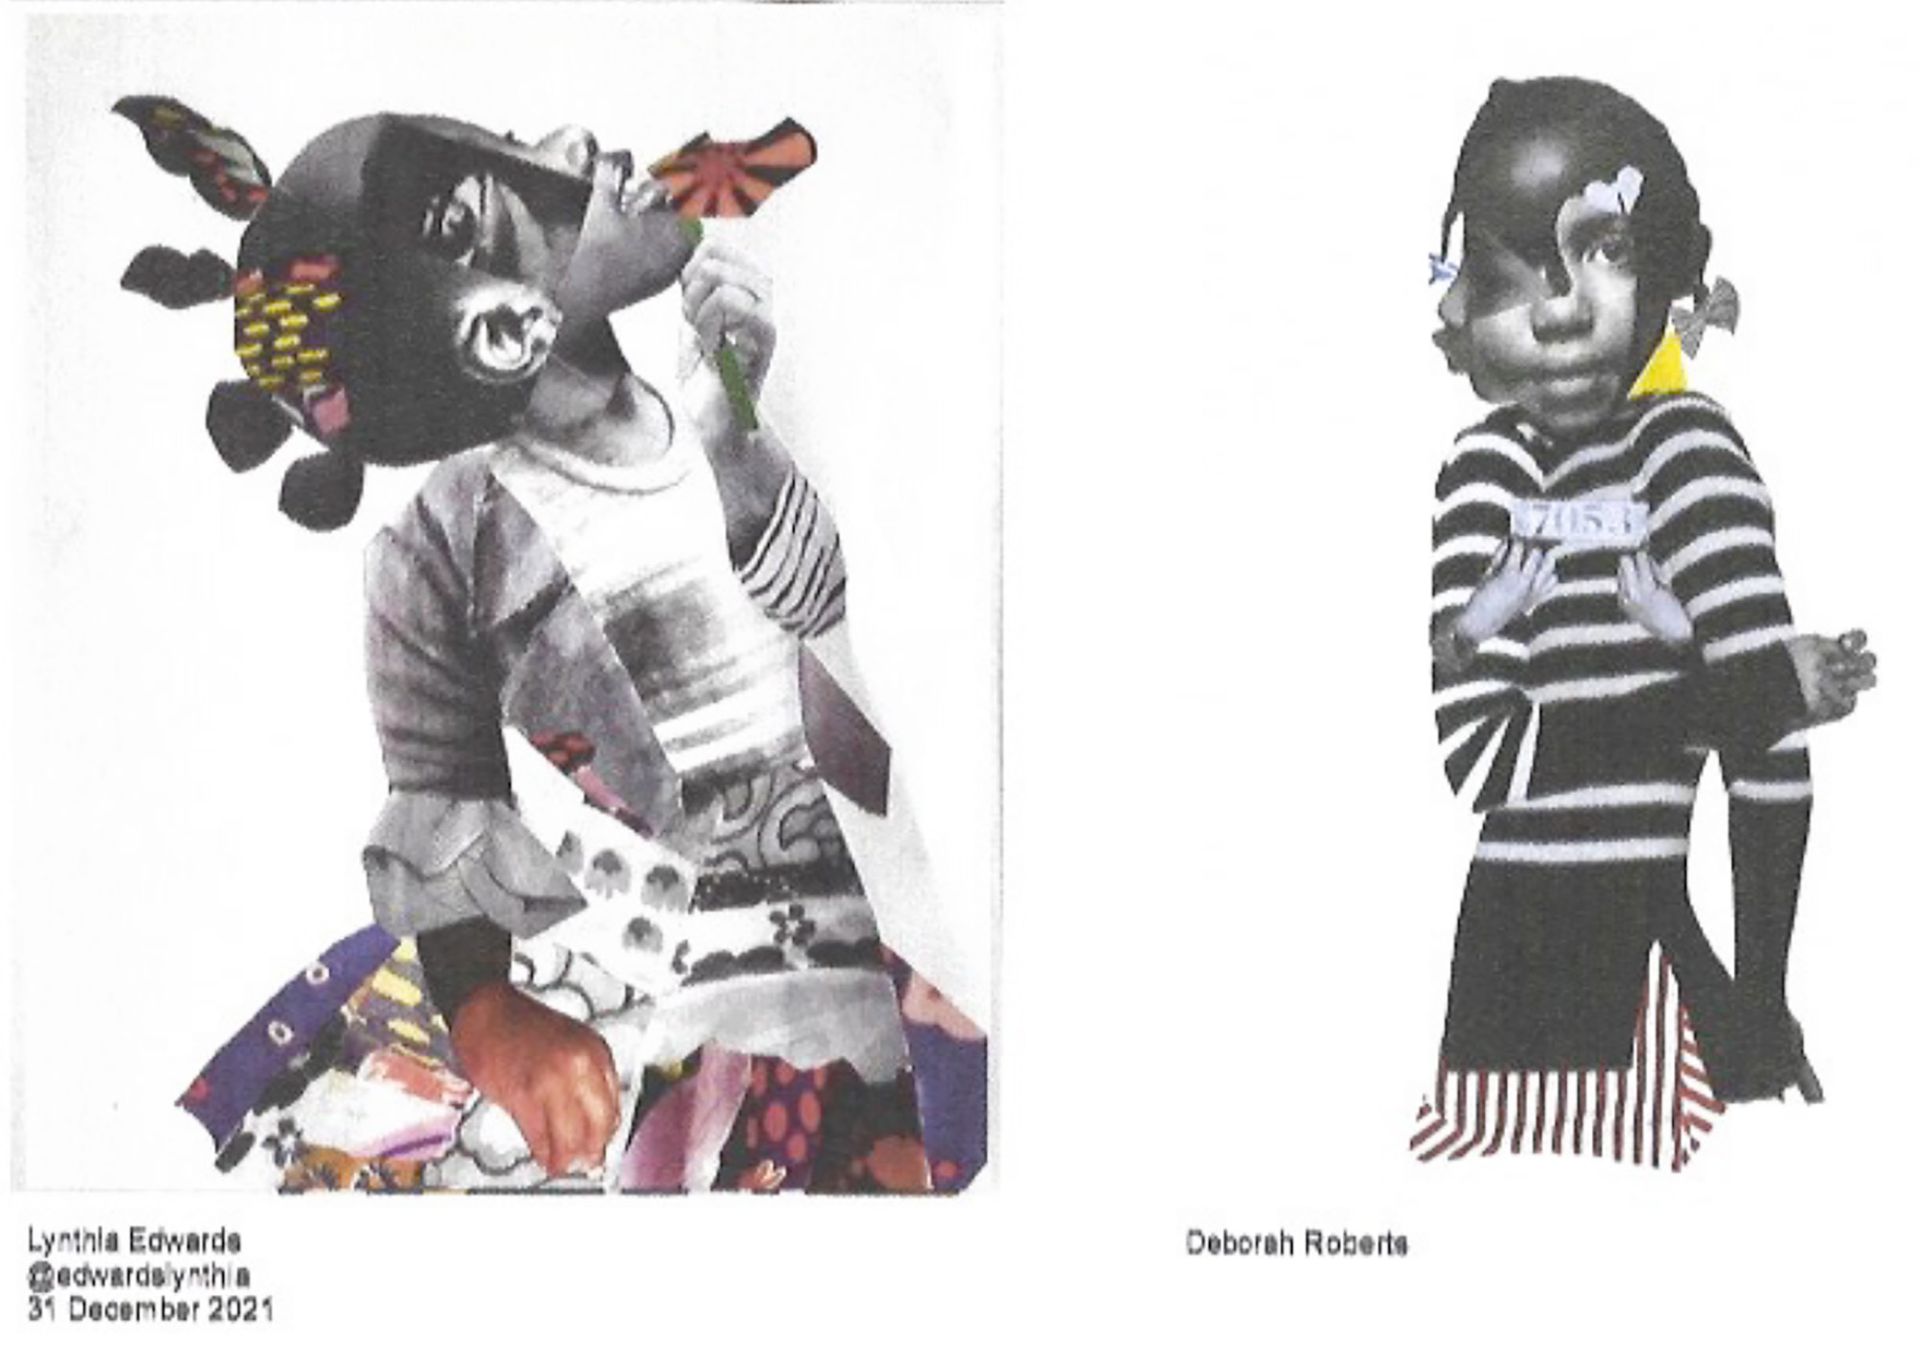 Examples of works by Lynthia Edwards (left) and Deborah Roberts (right) Court documents